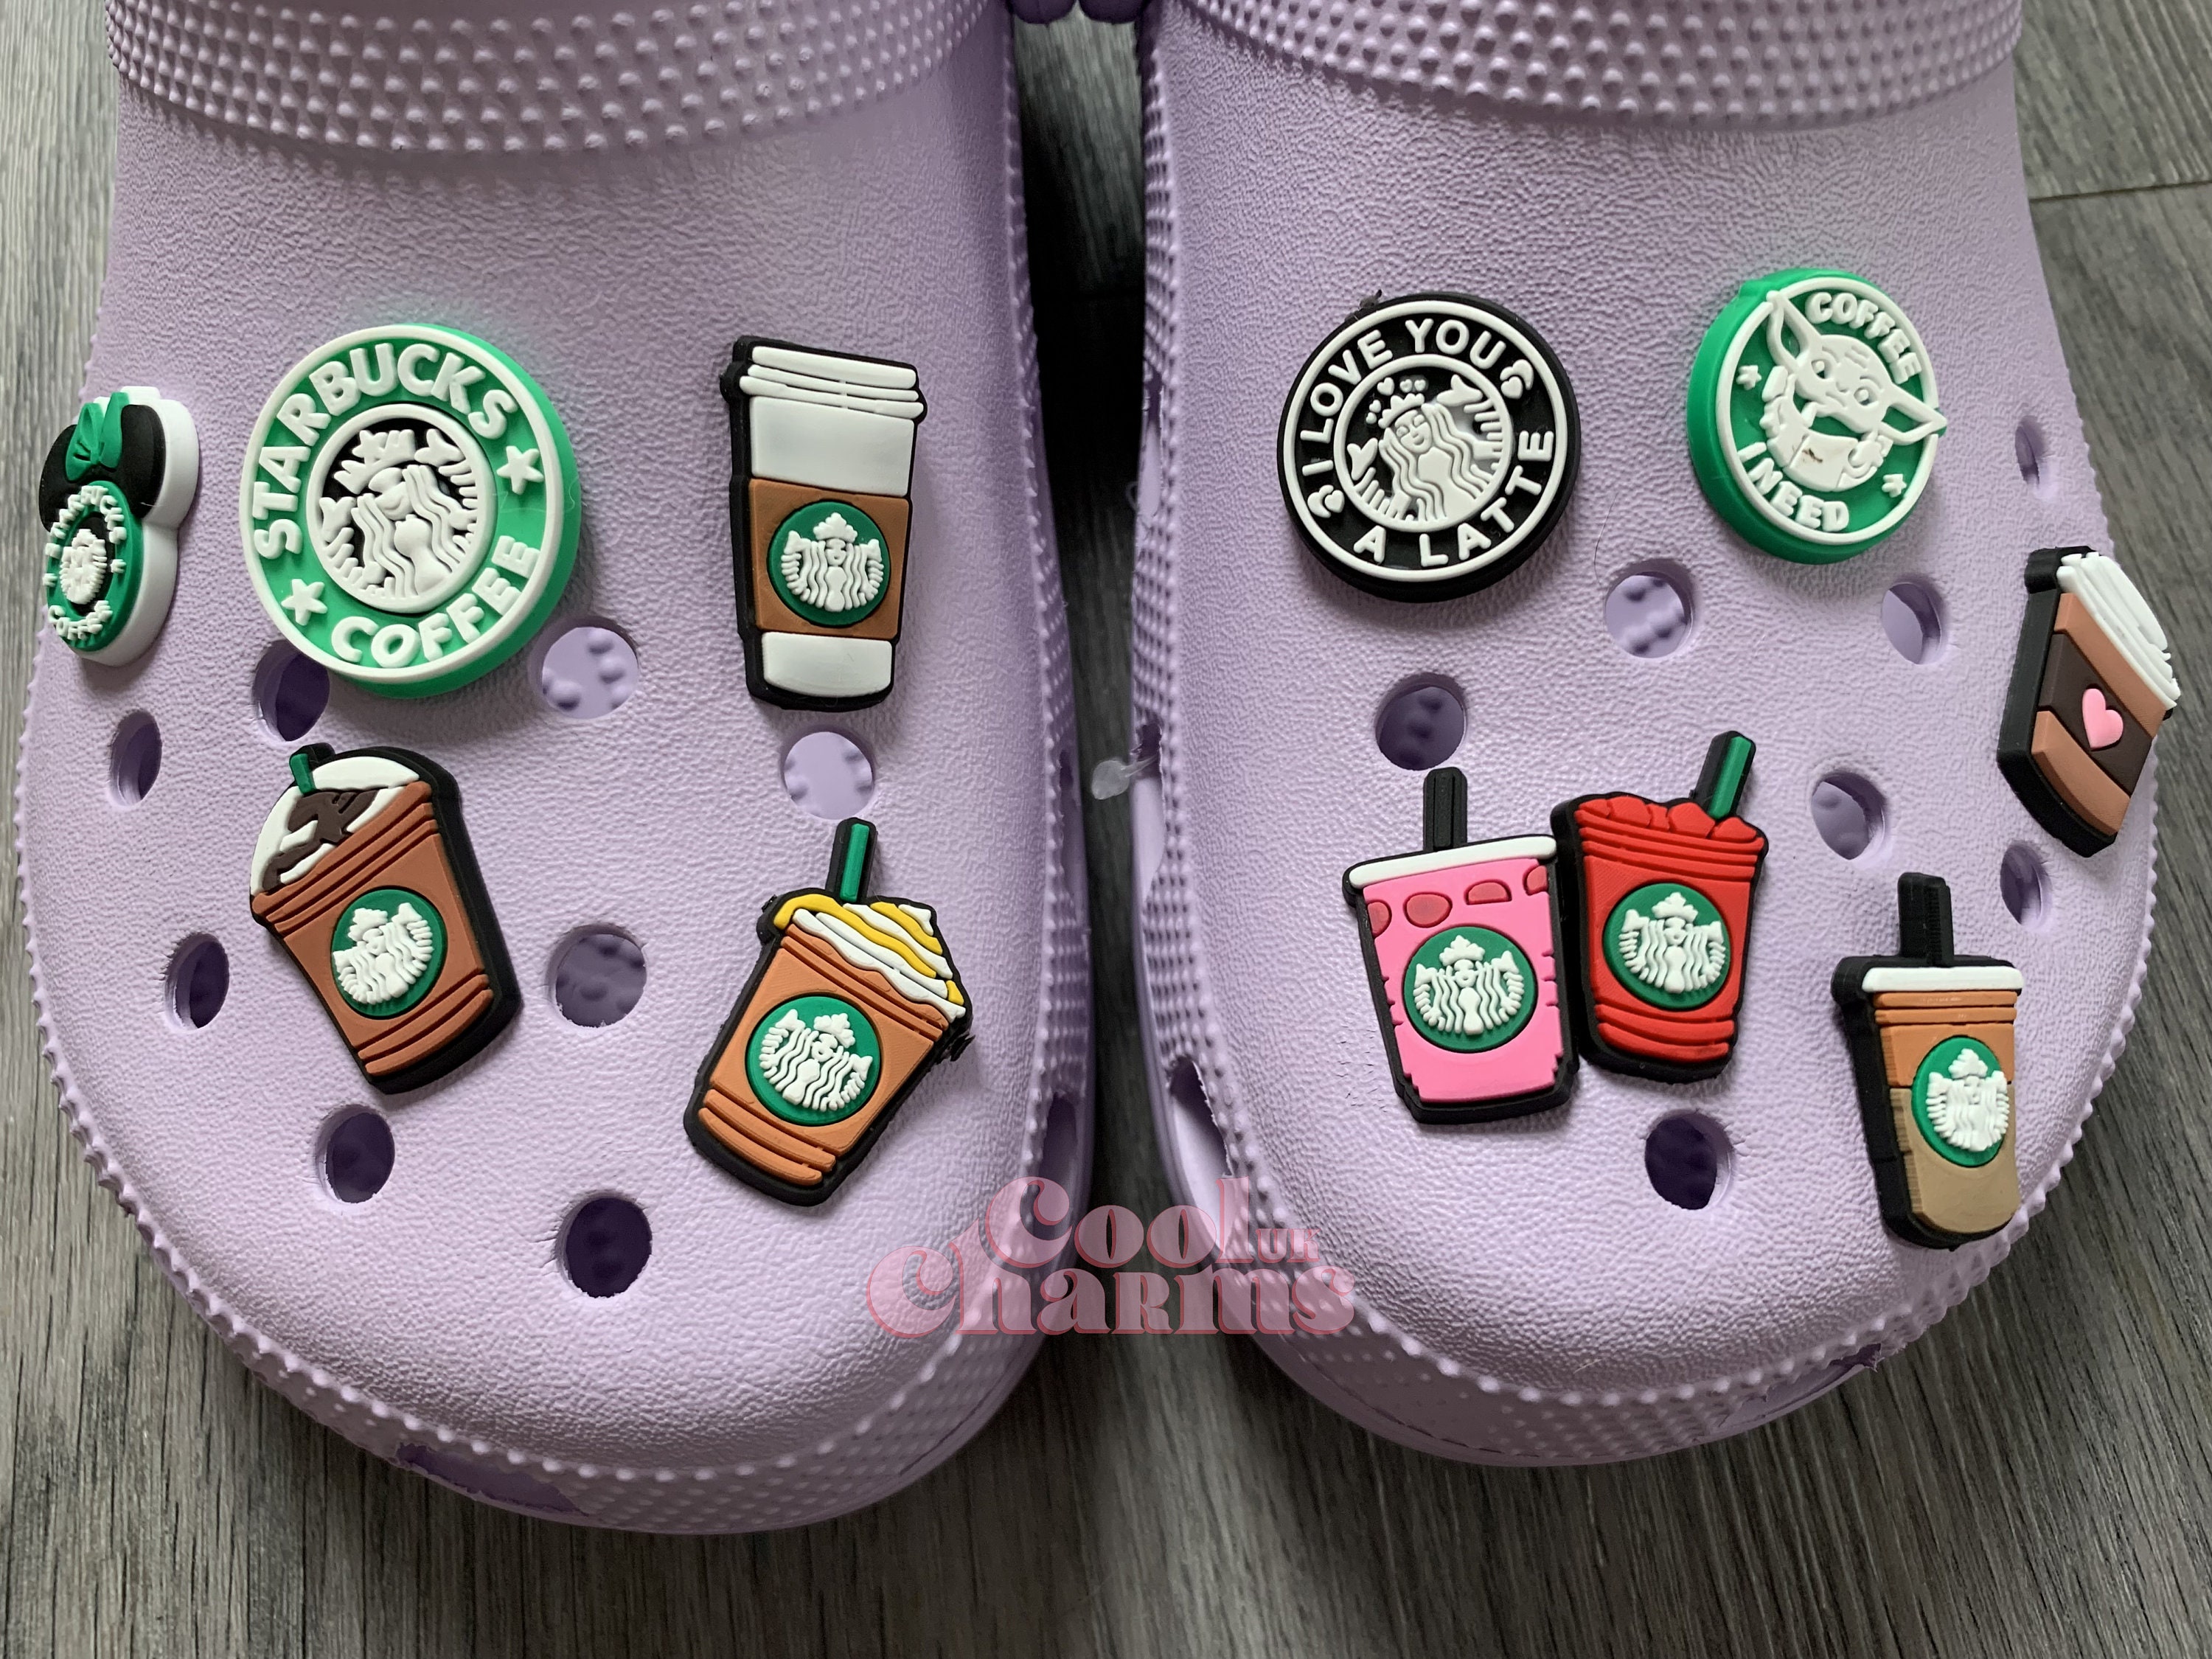 Starbucks 7 Pcs Croc Charms Shoe Set for Sale in Spring, TX - OfferUp